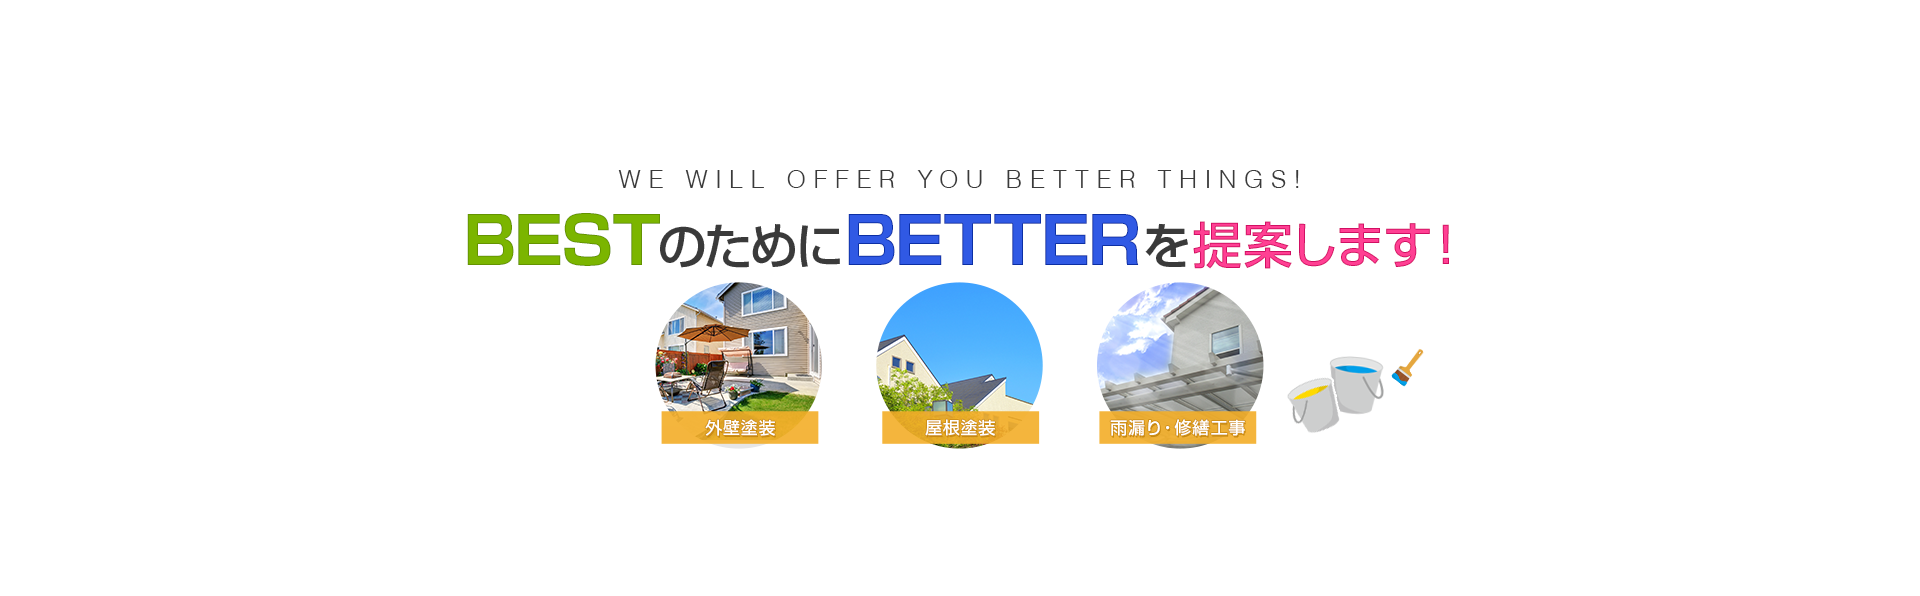 WE WILL OFFER YOU BETTER THINGS! BESTのためにBETTERを提案します！